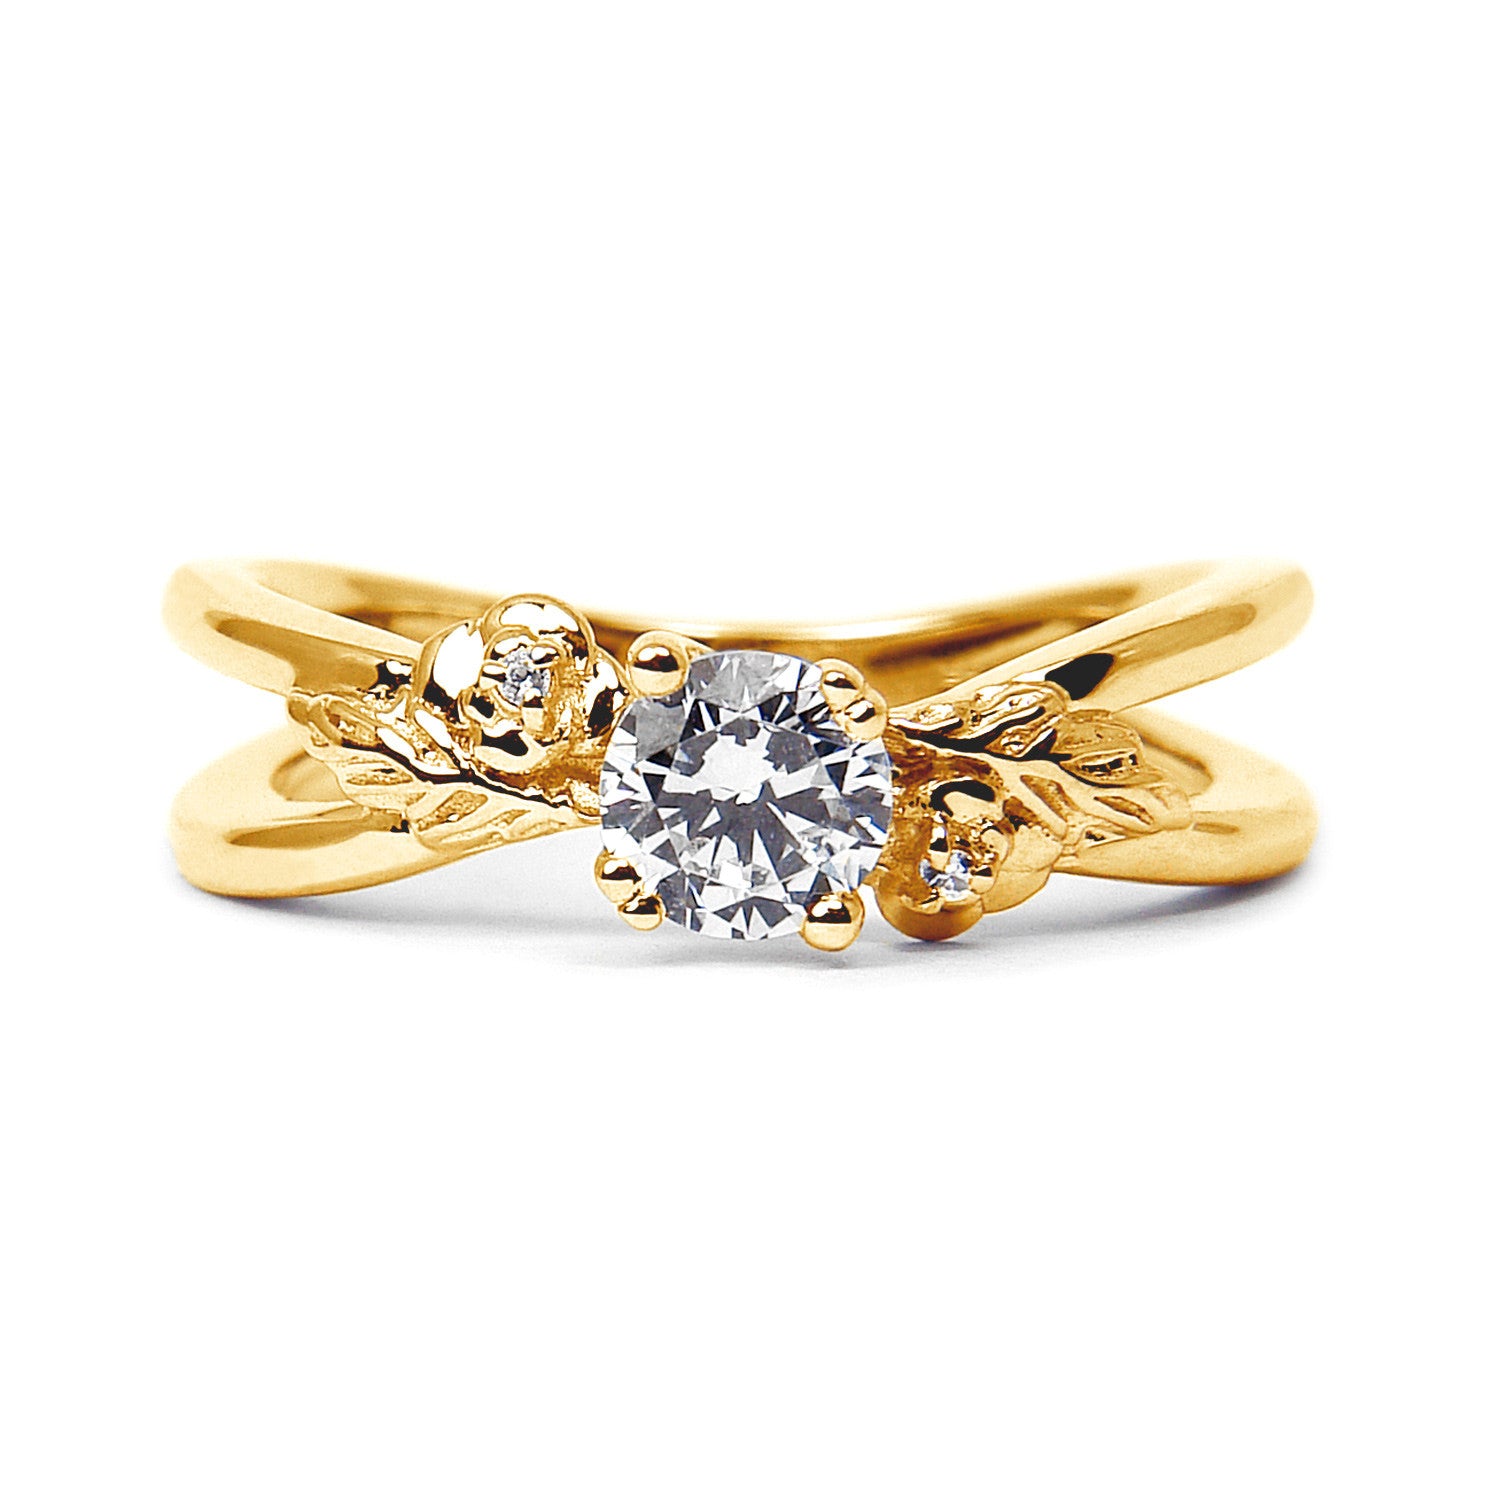 Foliage Ethical Diamond Engagement Ring, 18ct Fairtrade Gold